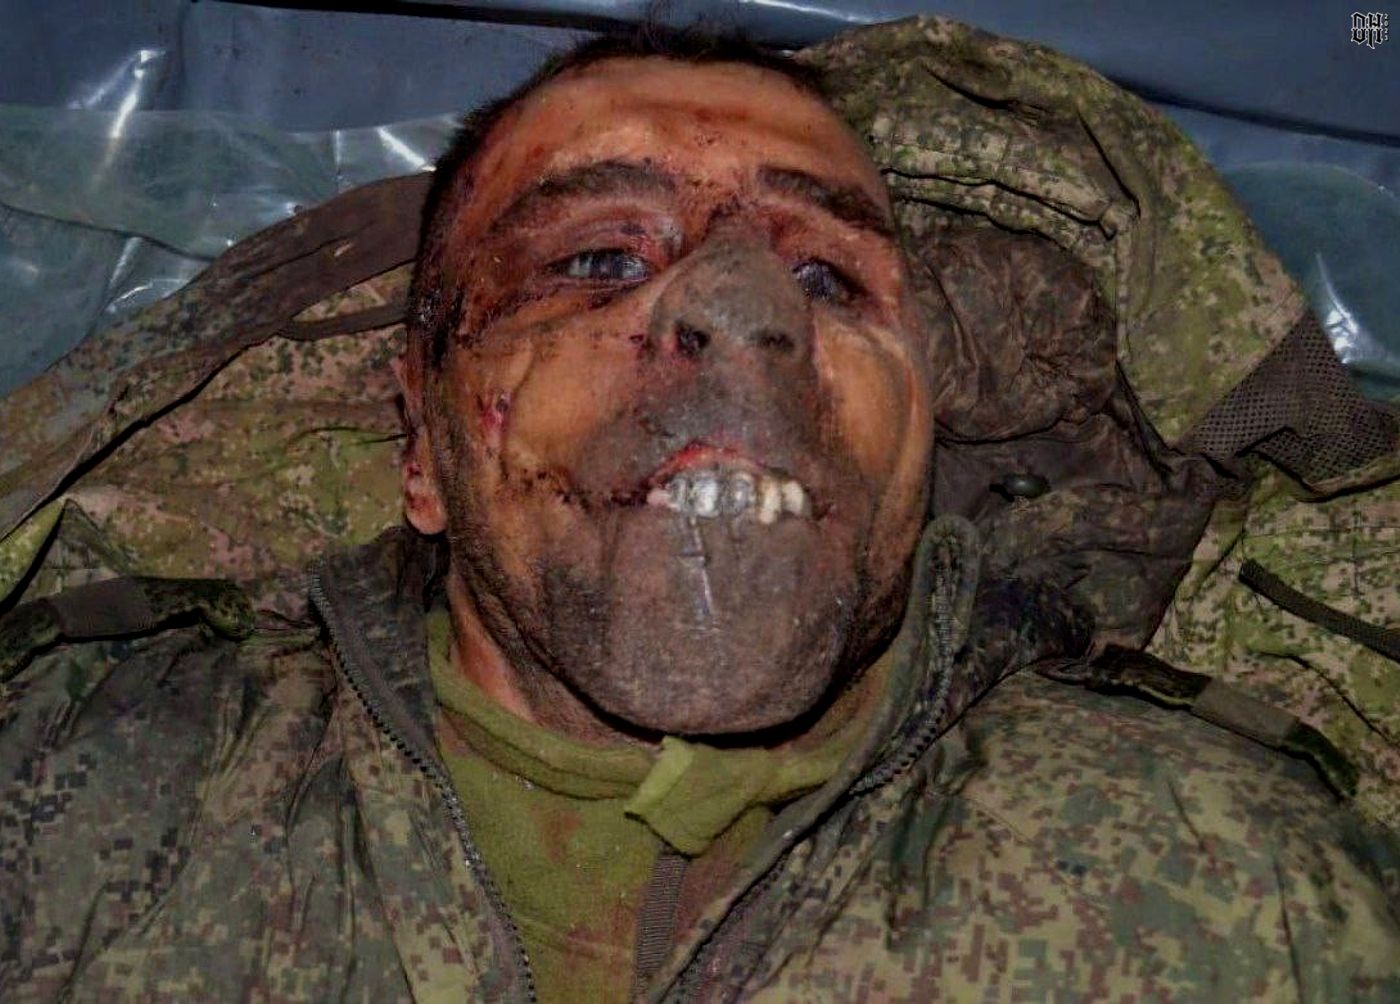 DH - Sldiers' Horror Faces and Bodies of Russia-Ukraine Conflict 23.jpg